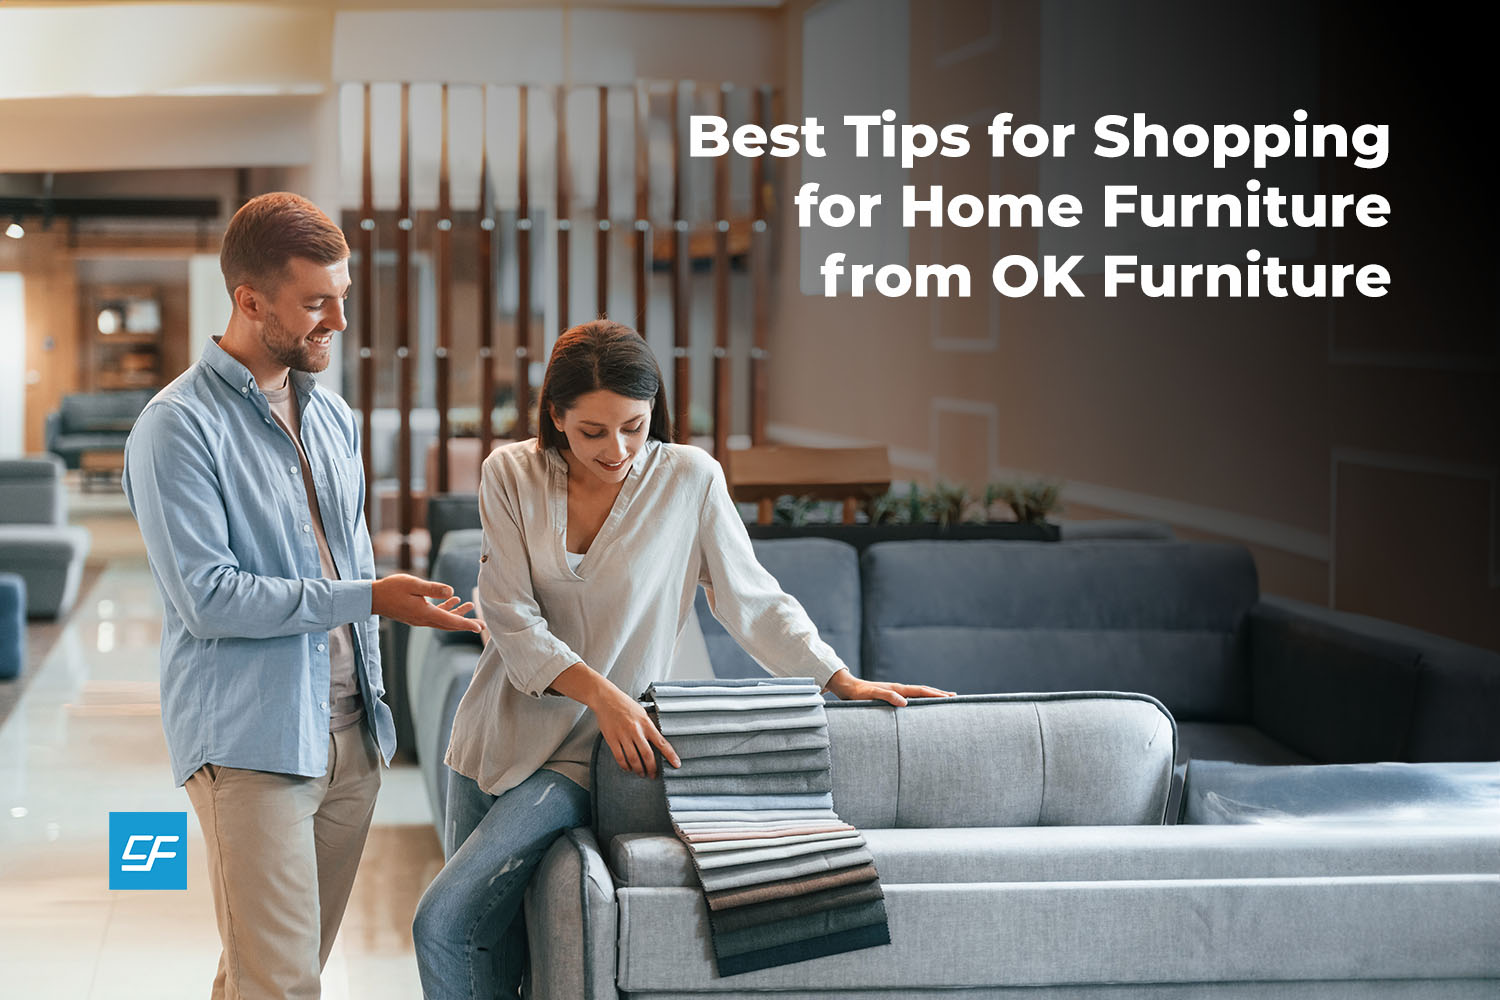 Best Tips for Shopping for Home Furniture from OK Furniture